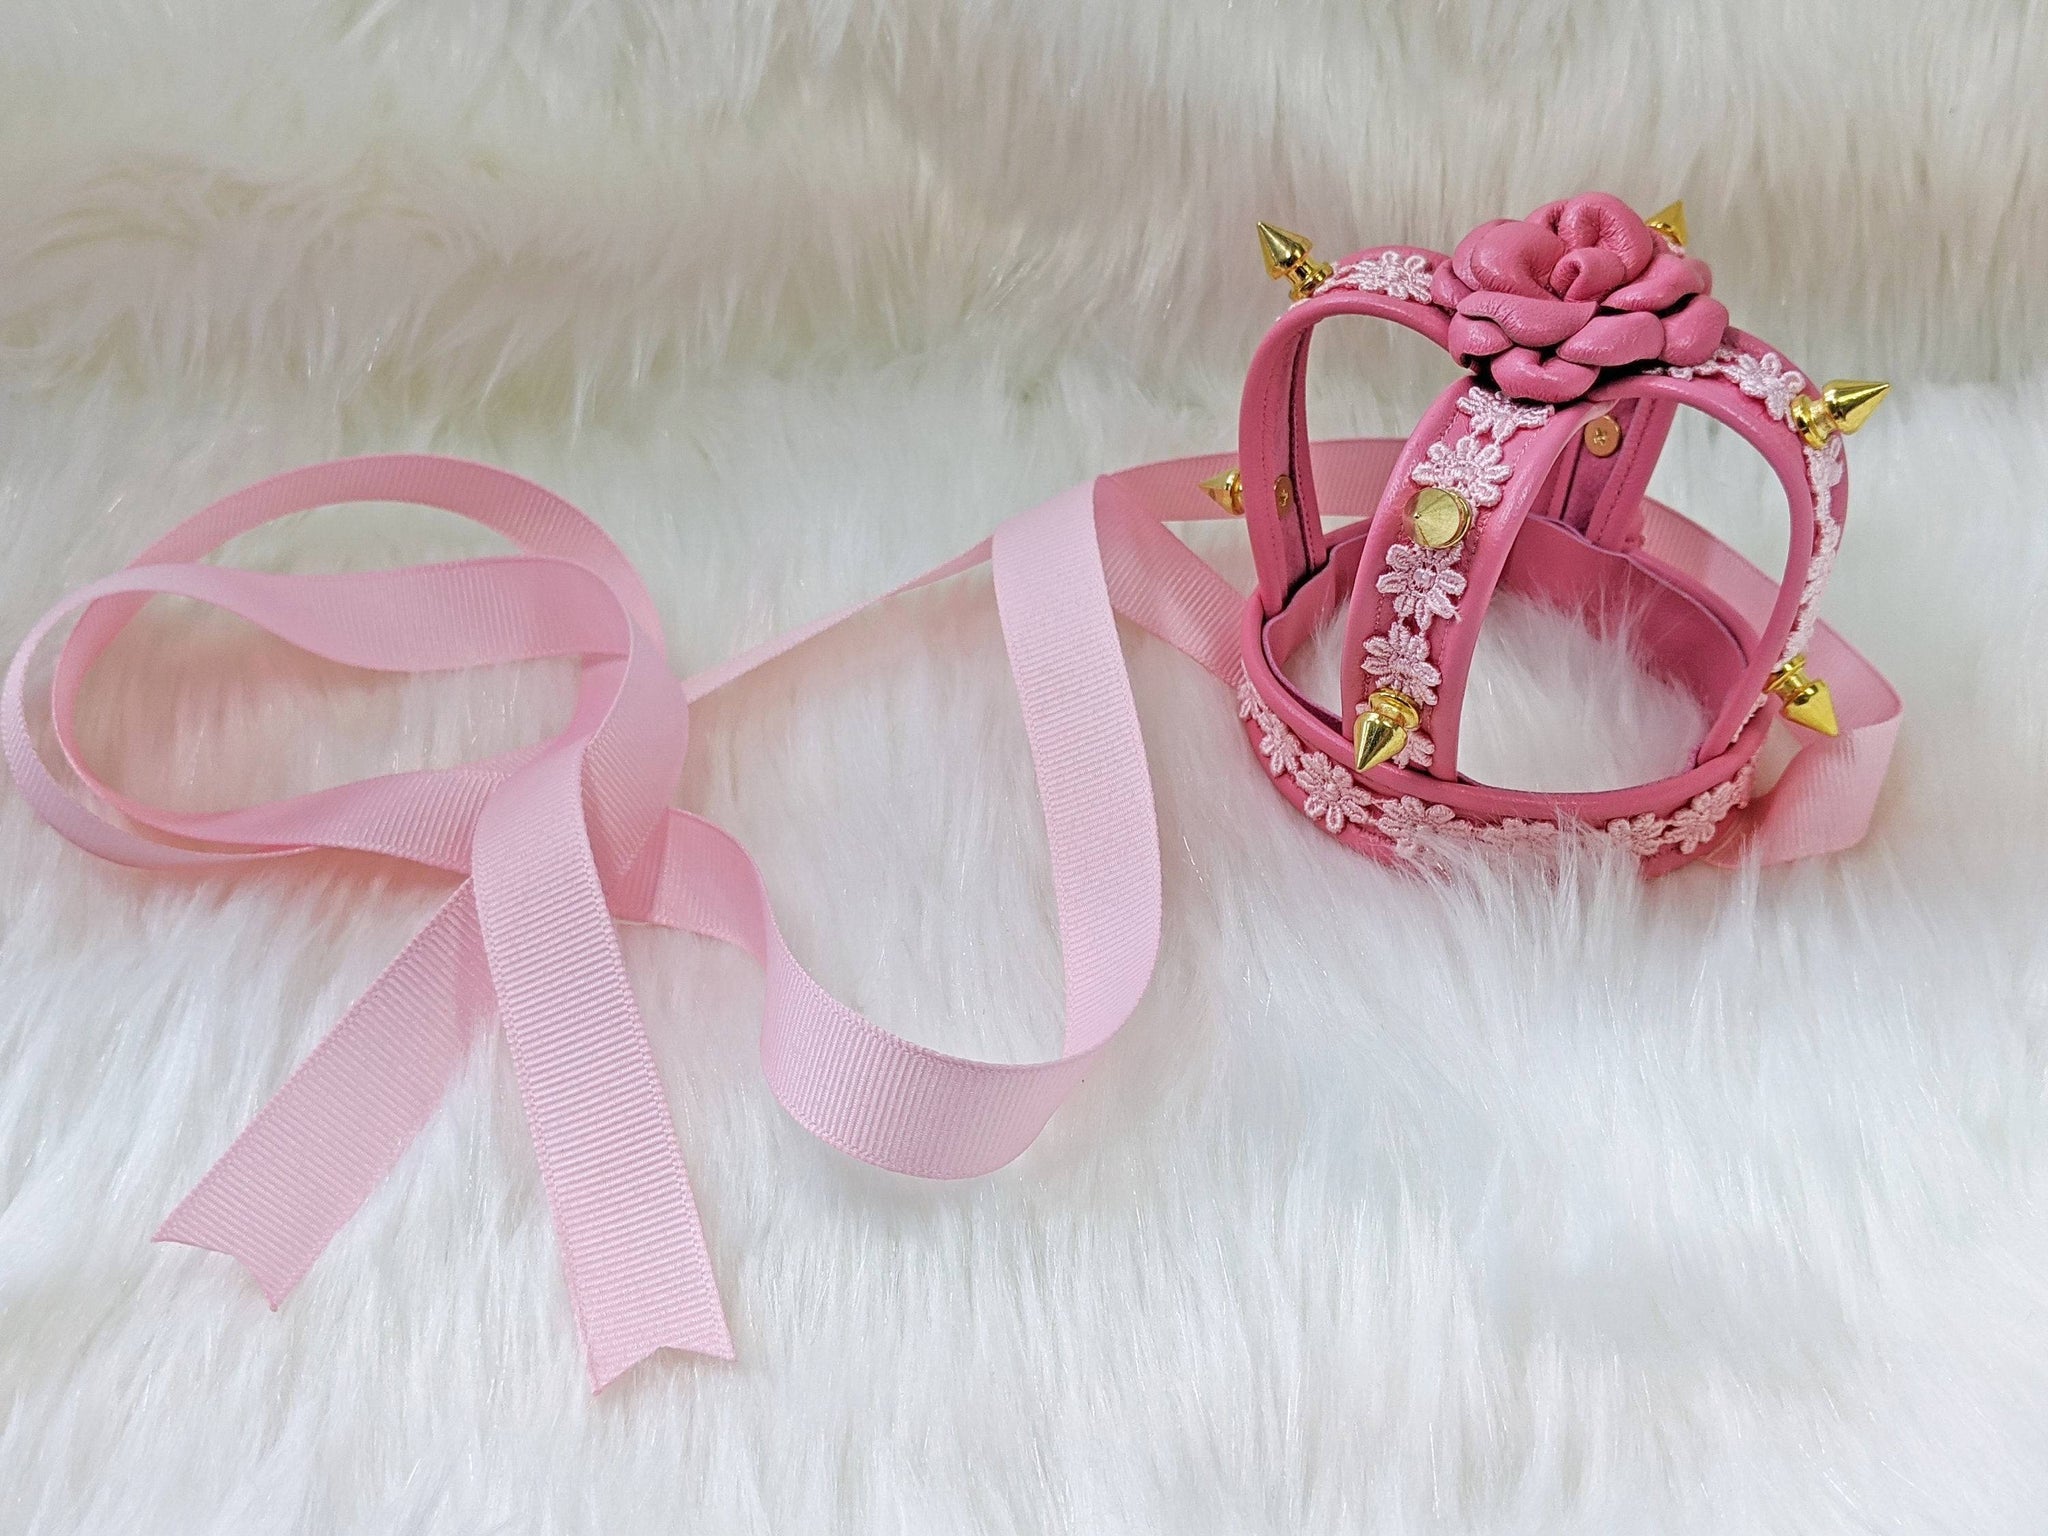 Miniature Pink Spiked Leather Crown - Lolita Collective